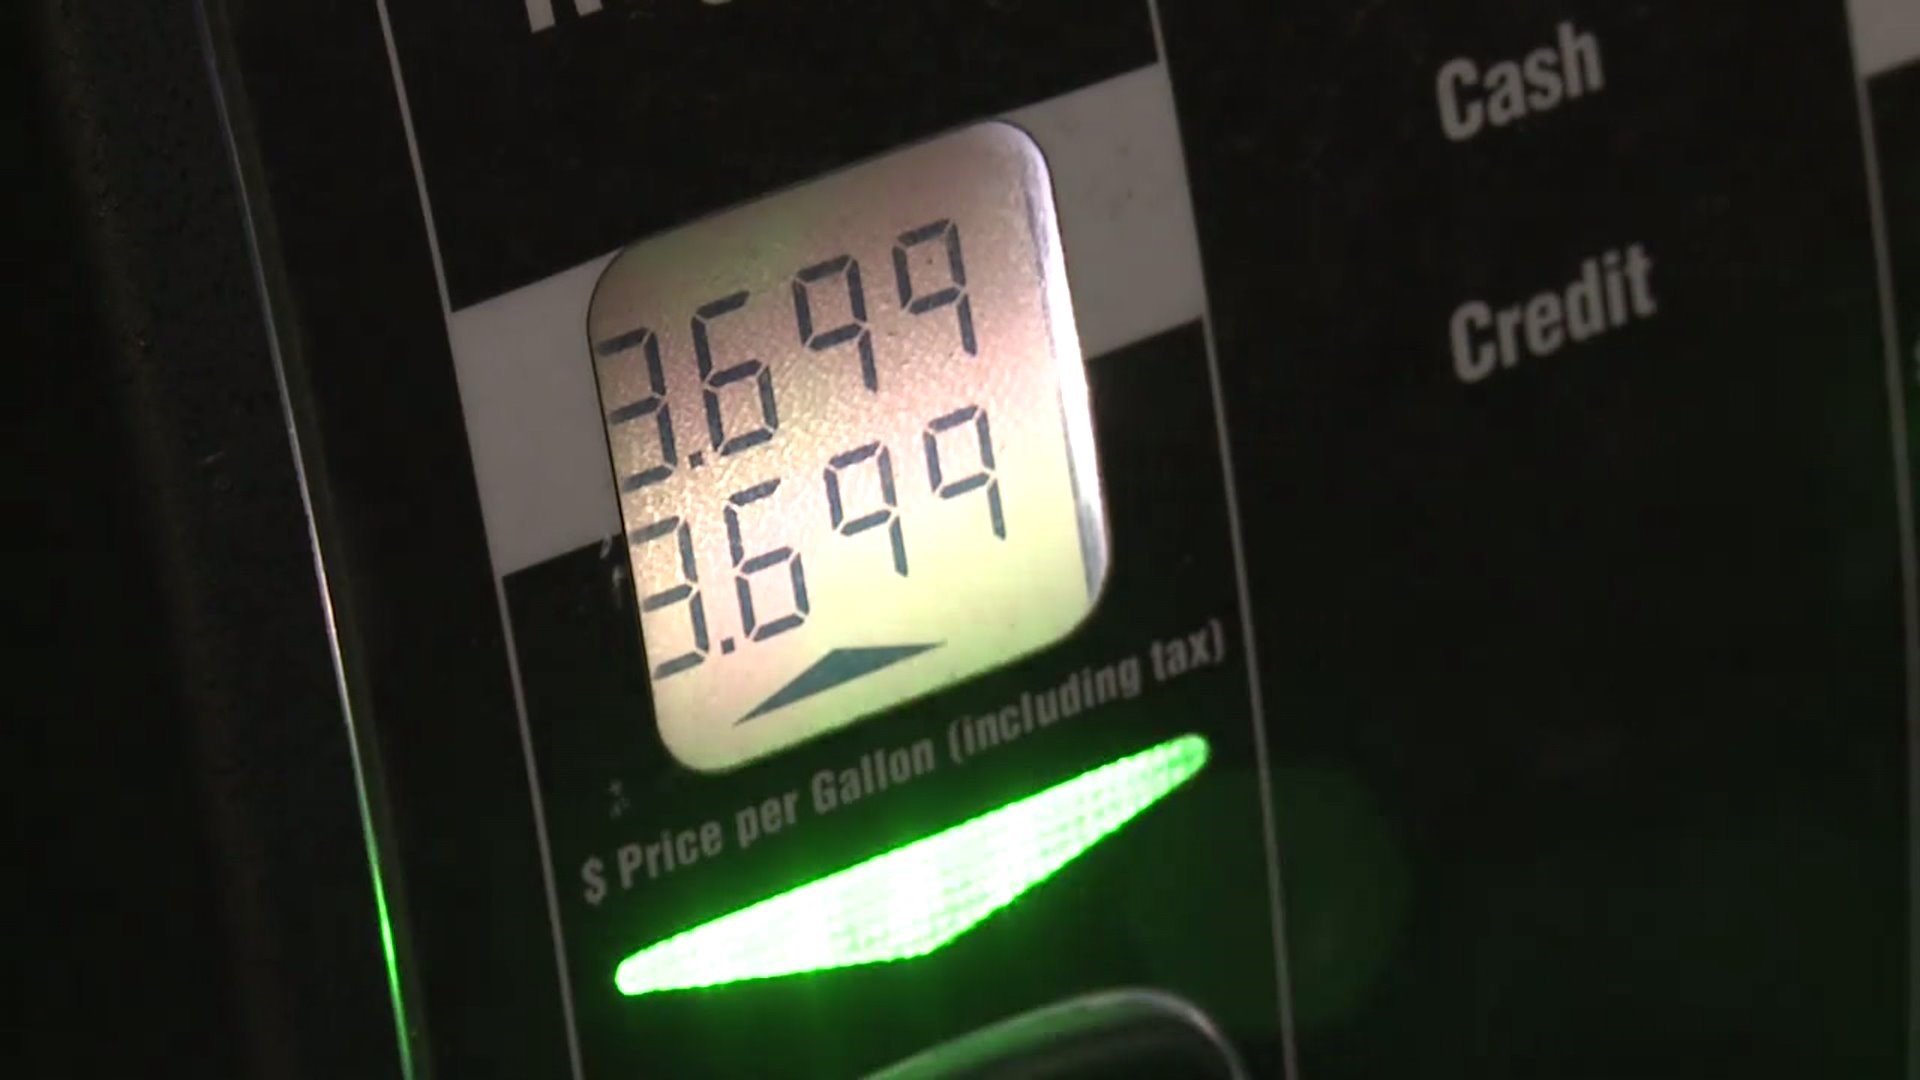 Experts say the state's prices are often in the top 10 for most expensive gas.